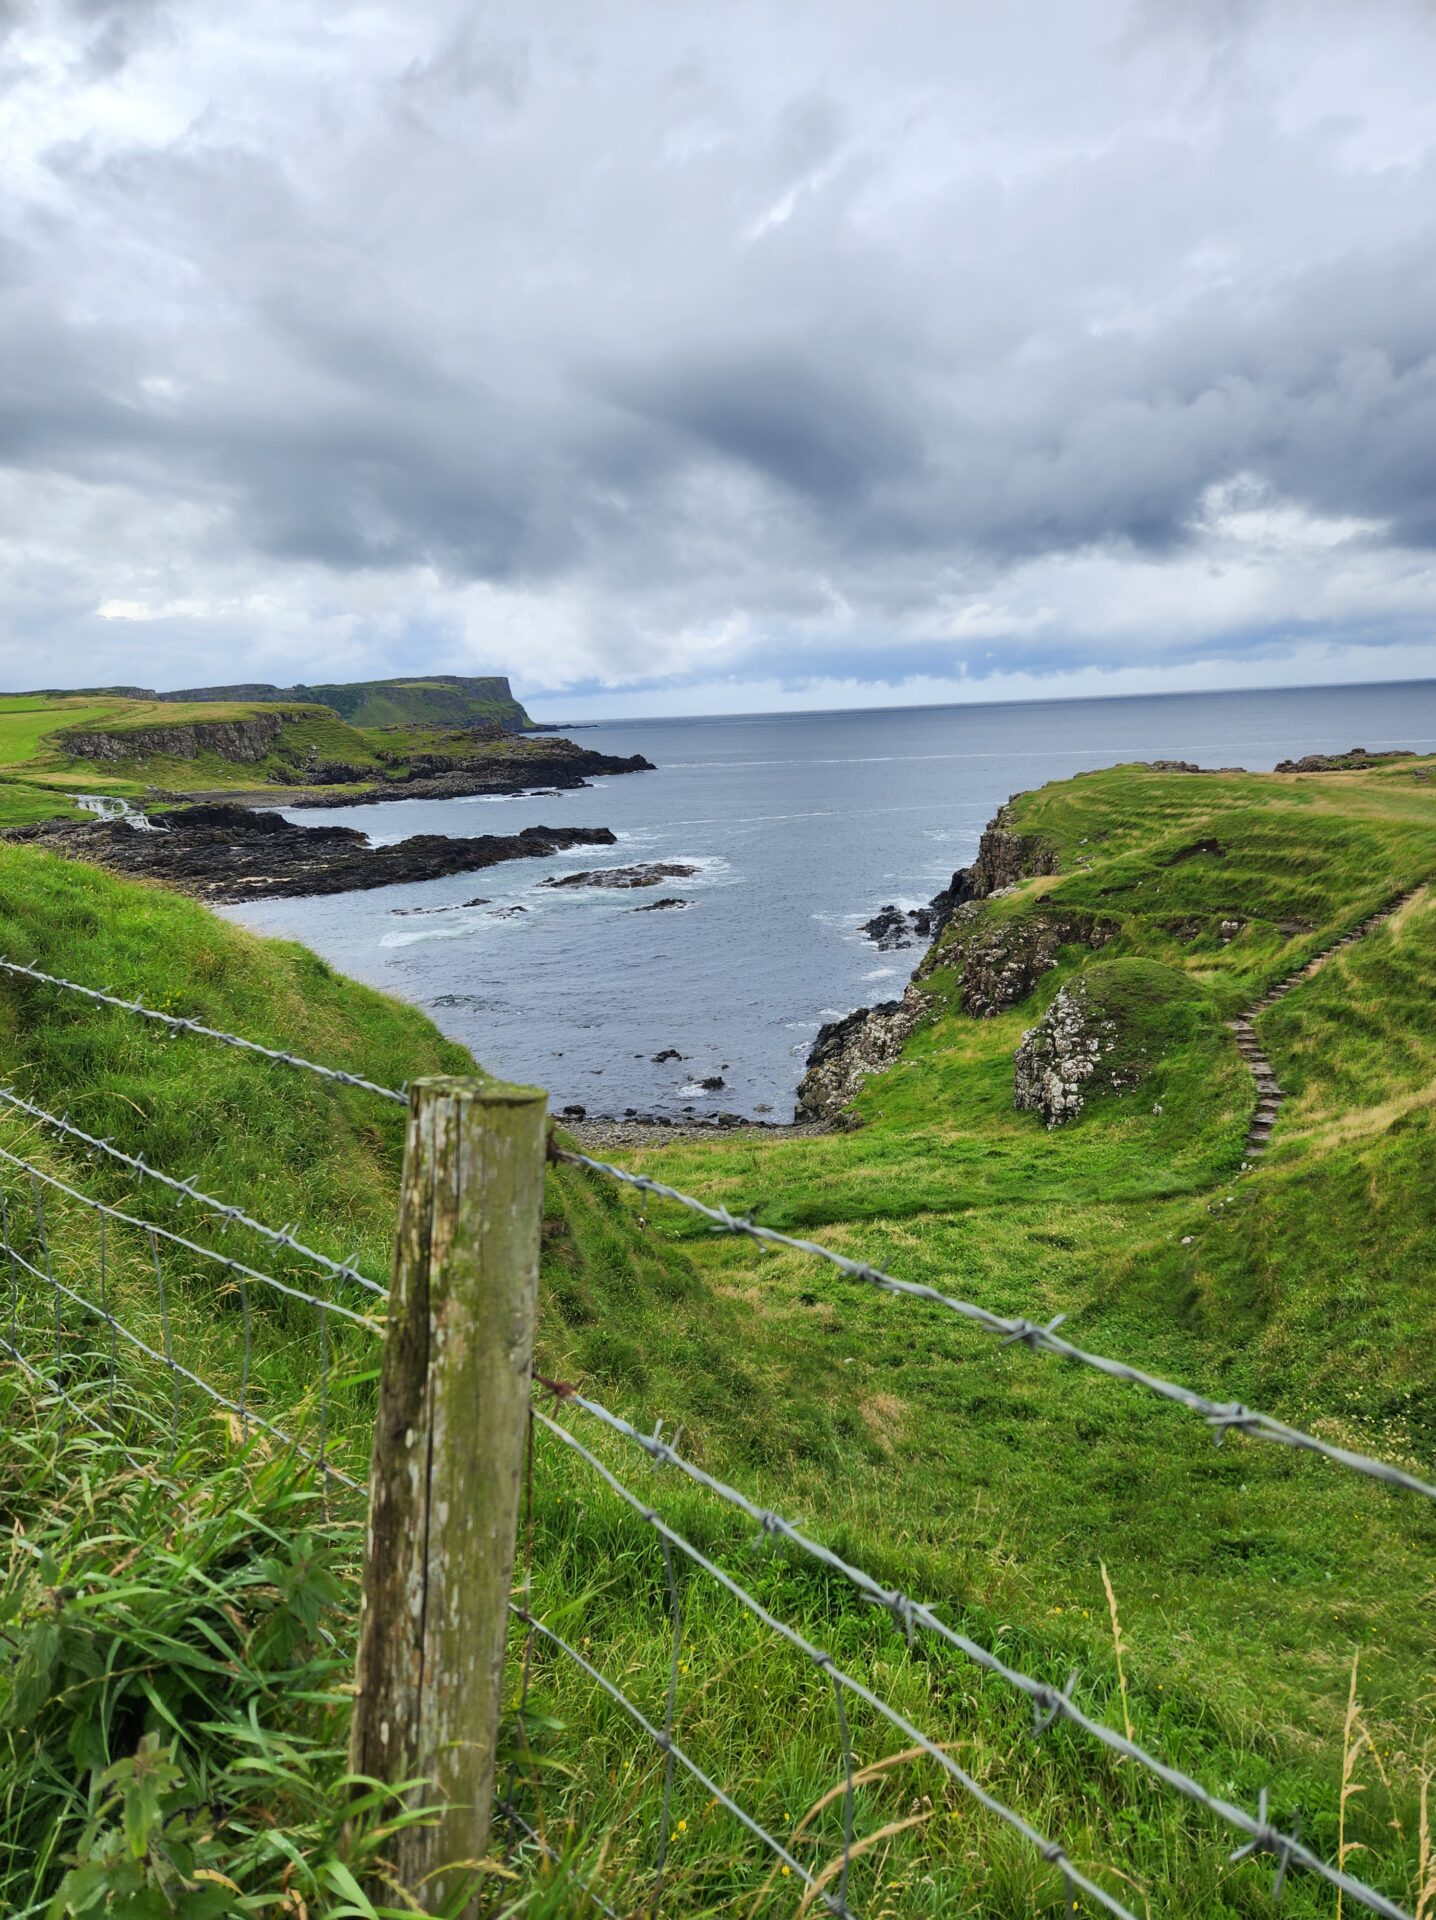 Carrick-a-Rede to Dunseverick route